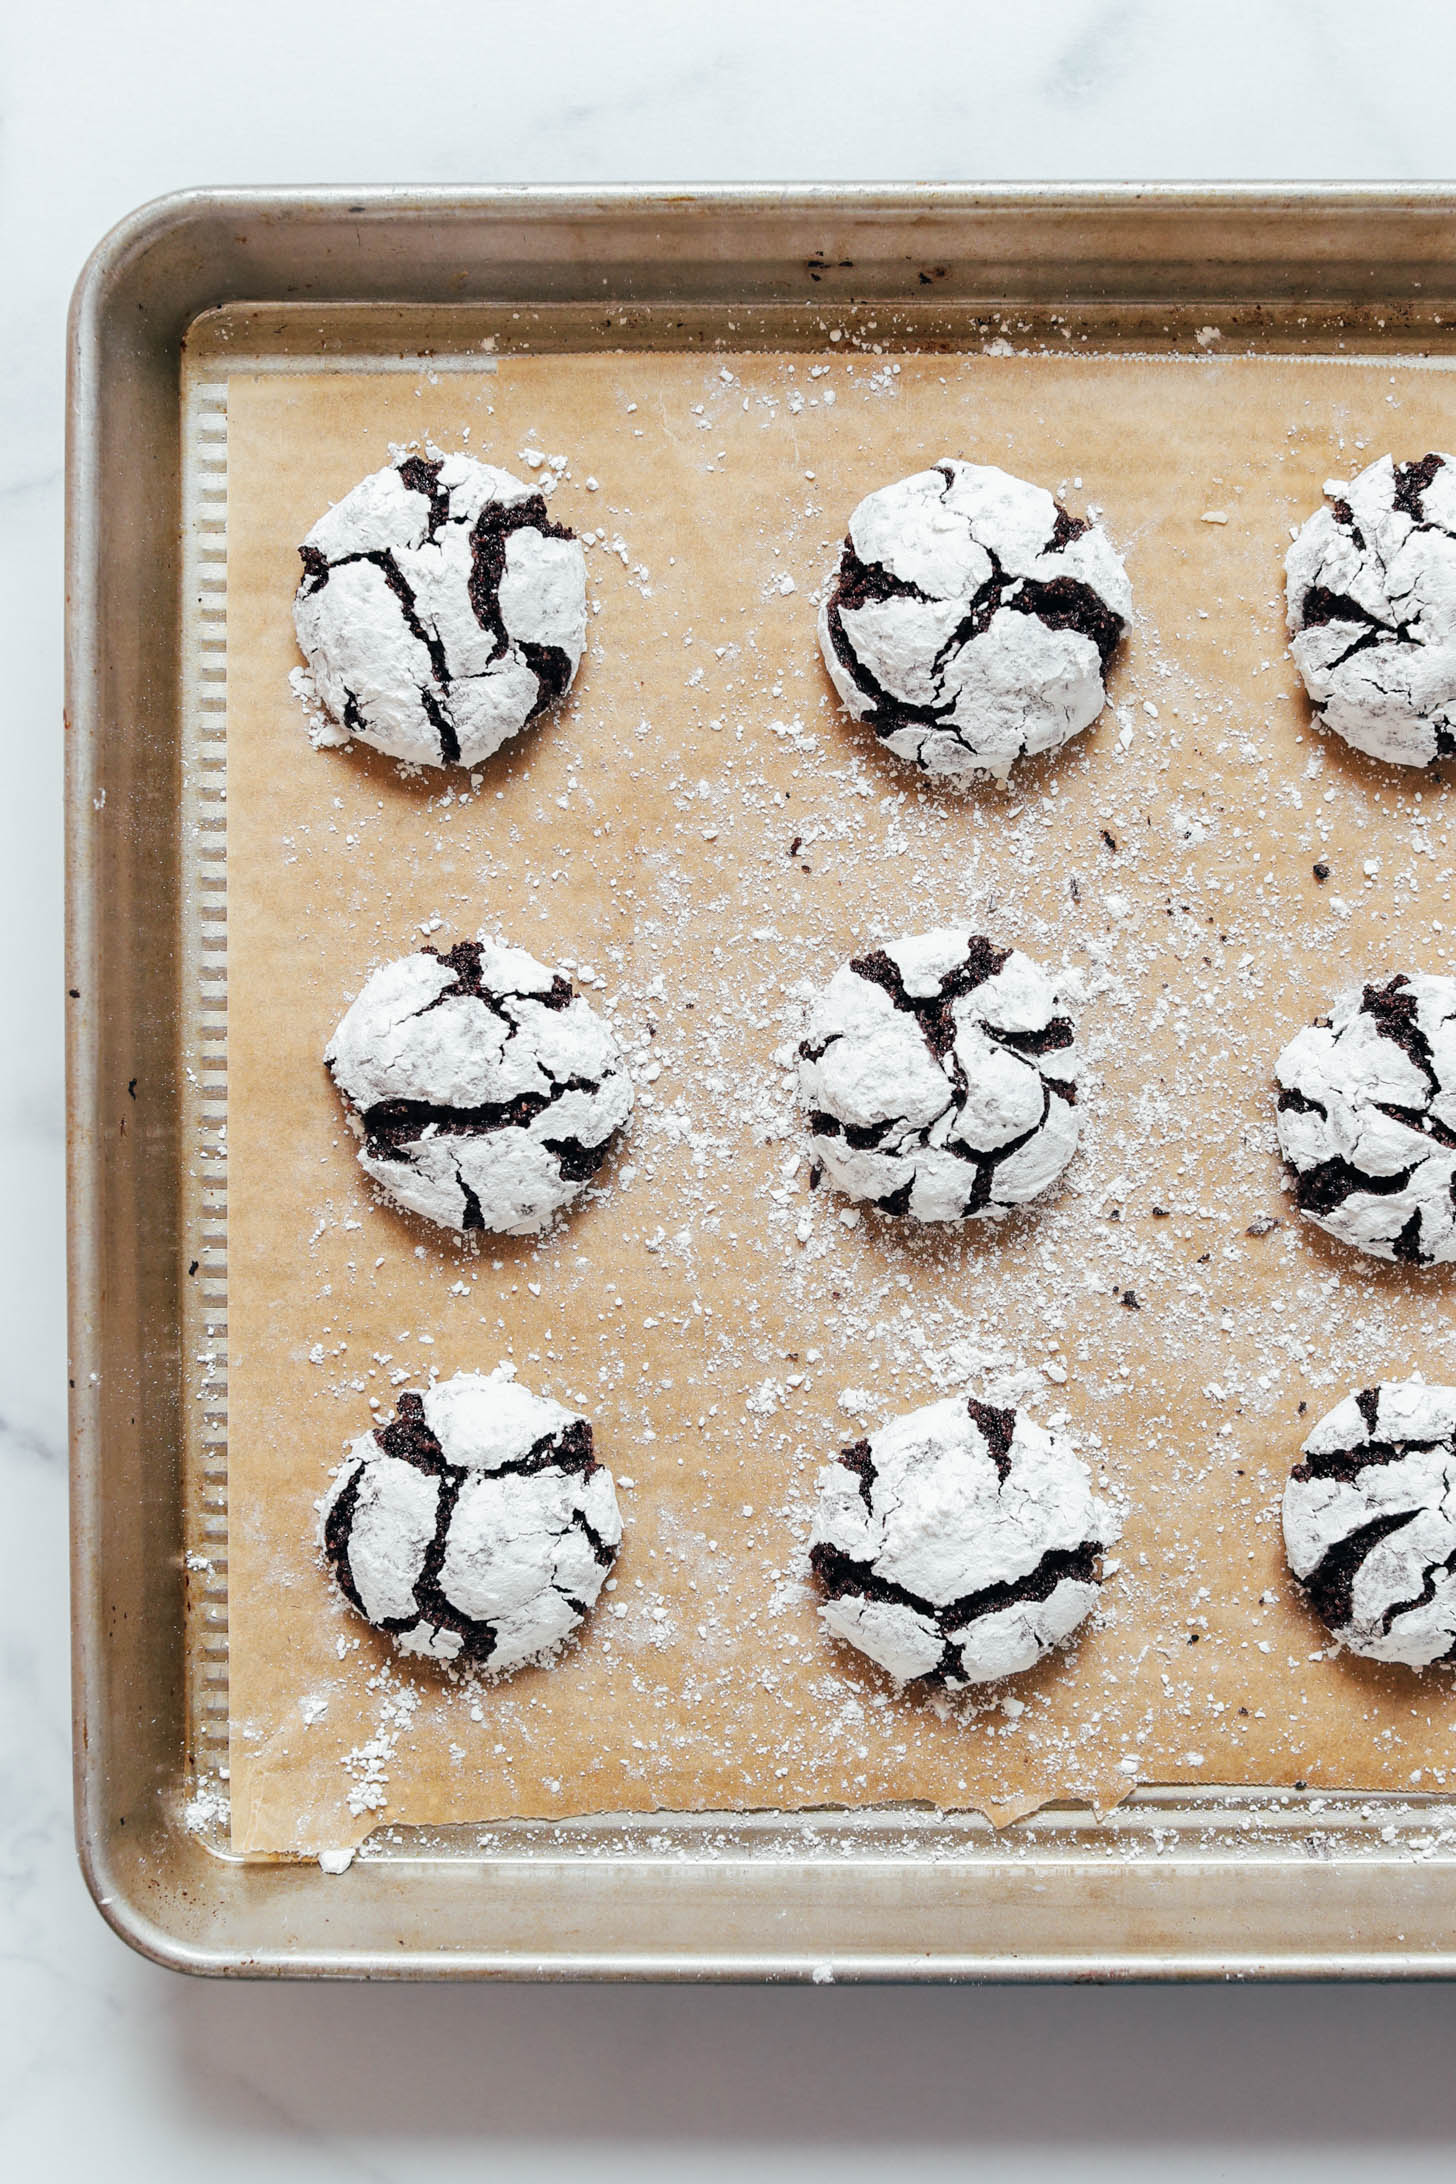 Freshly baked gluten-free chocolate crinkle cookies with a signature crackly crust